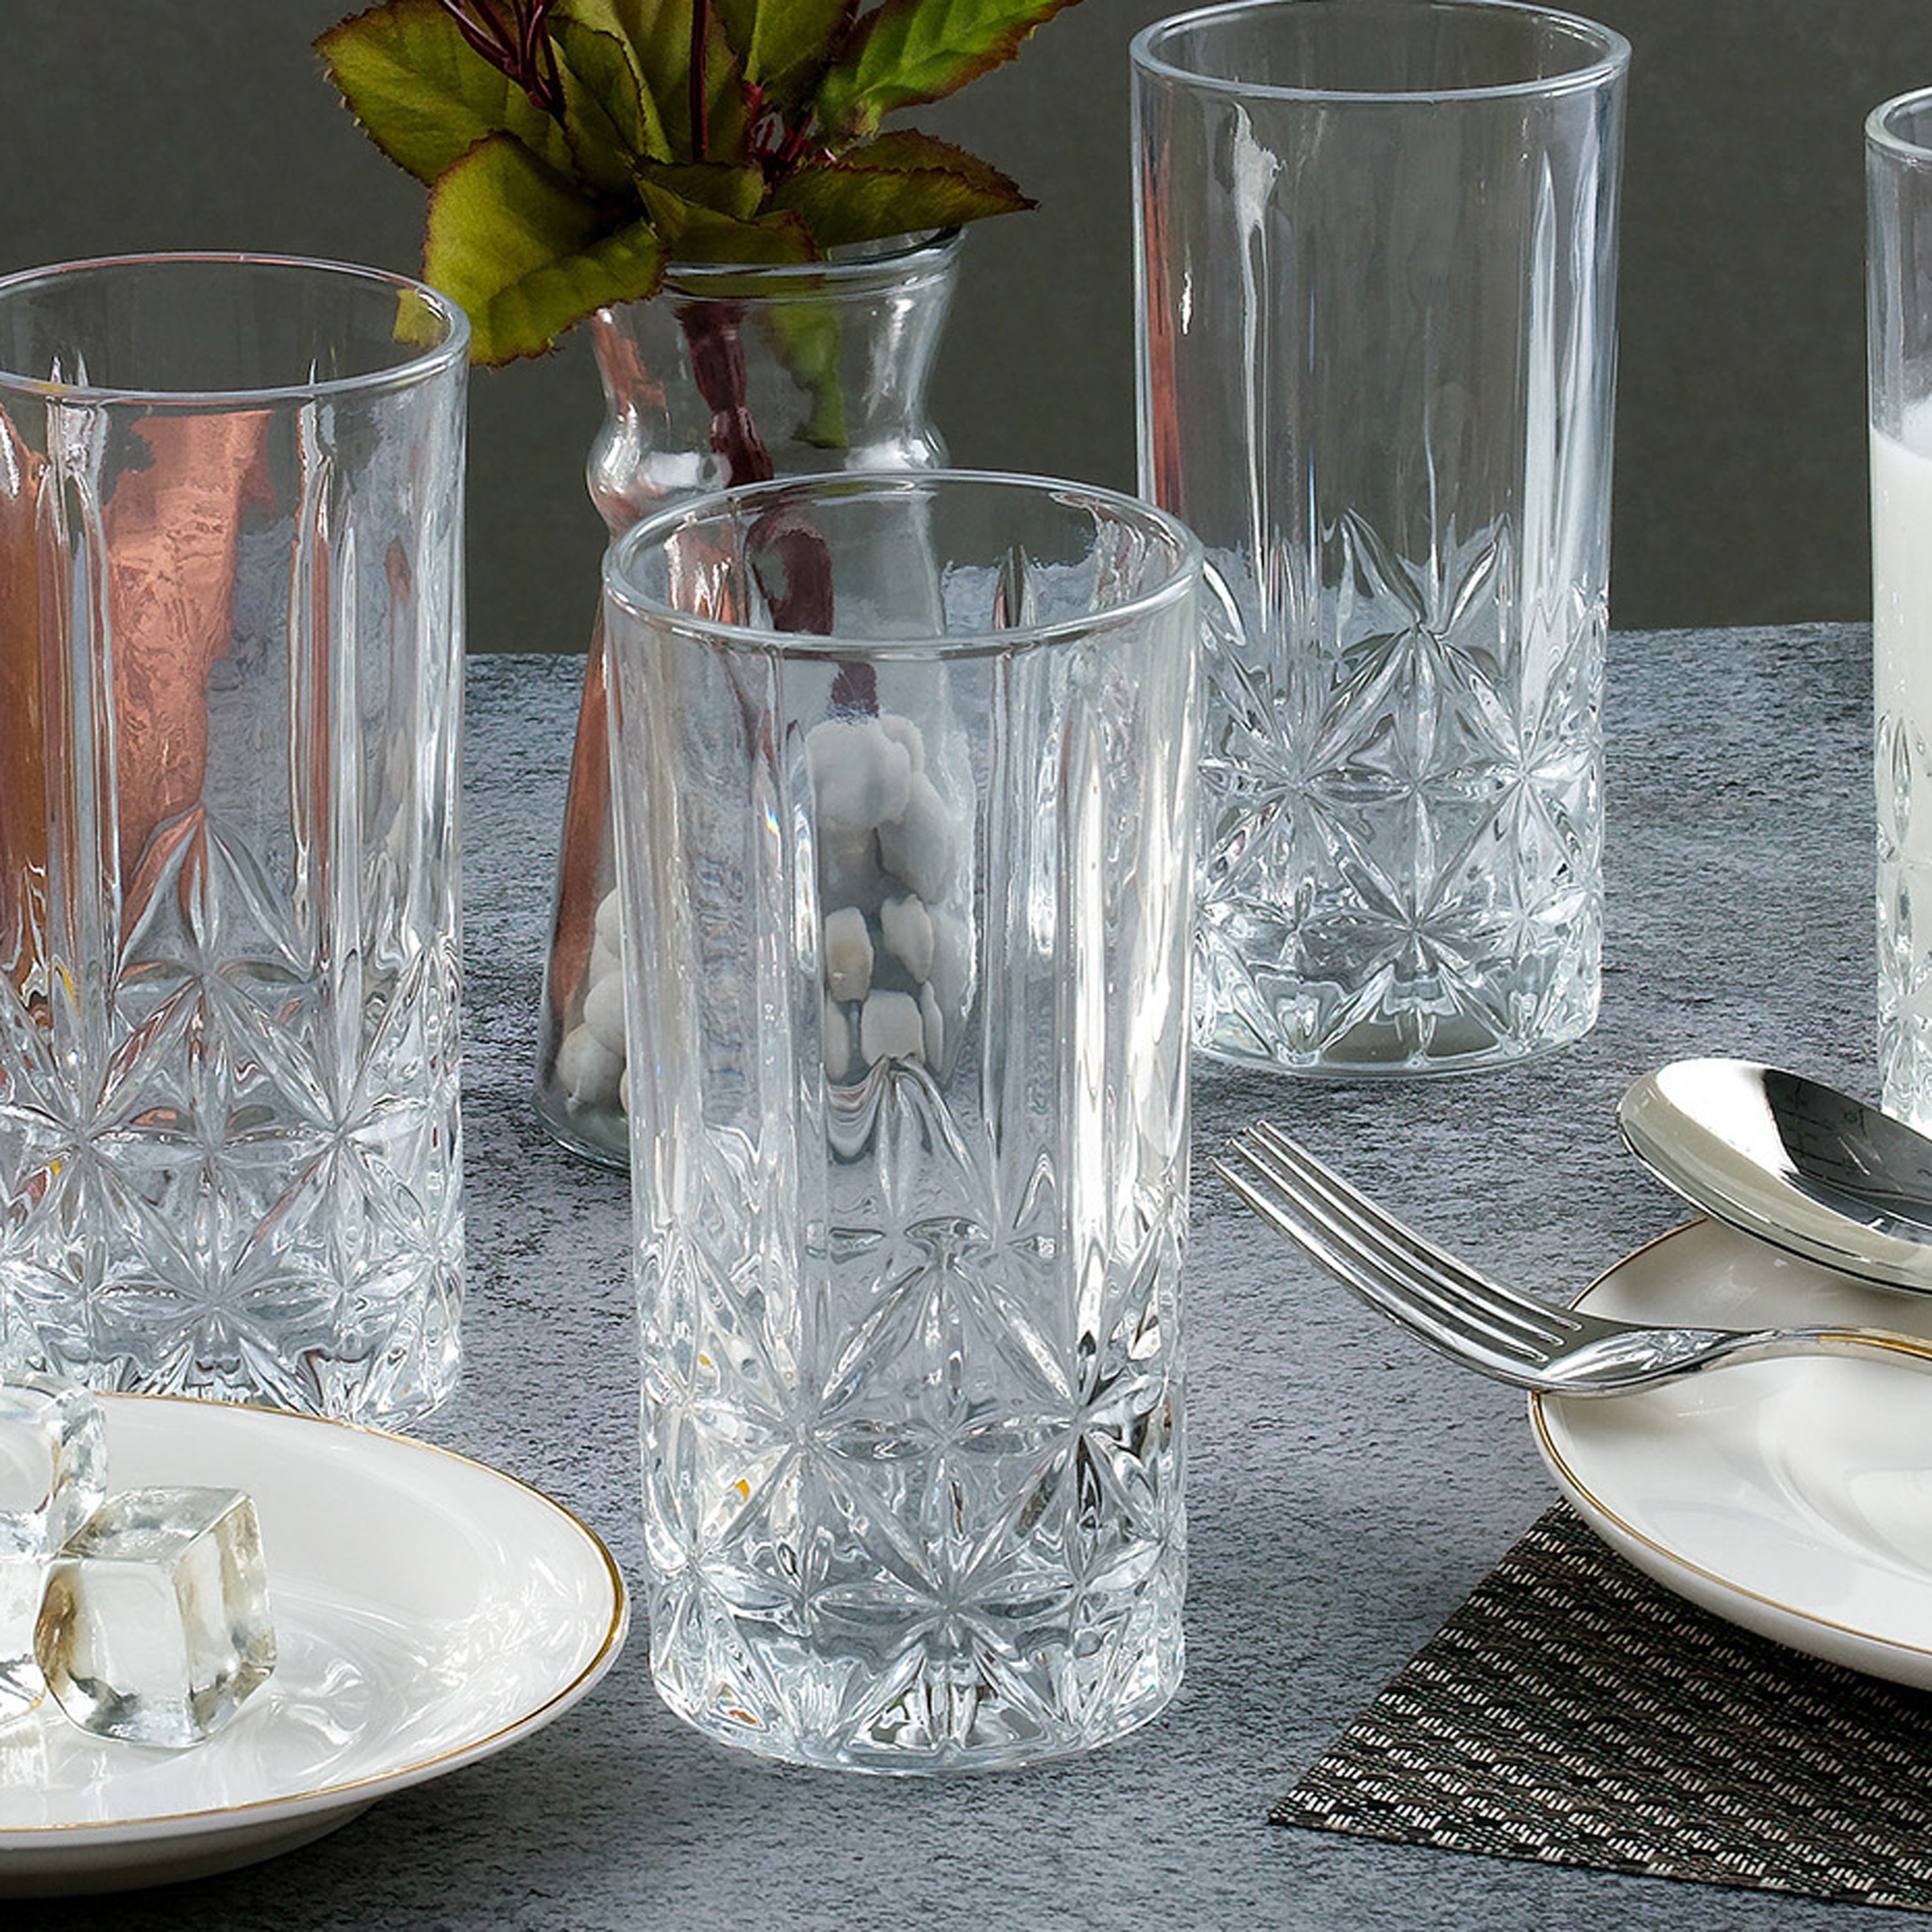 https://ak1.ostkcdn.com/images/products/is/images/direct/e354e00fc57551a080289bce3fe1ec815270f9cf/Lorren-Home-Trends-12-OZ.-Drinking-Glass-Textured-Cut-Glass%2C-Set-of-6.jpg